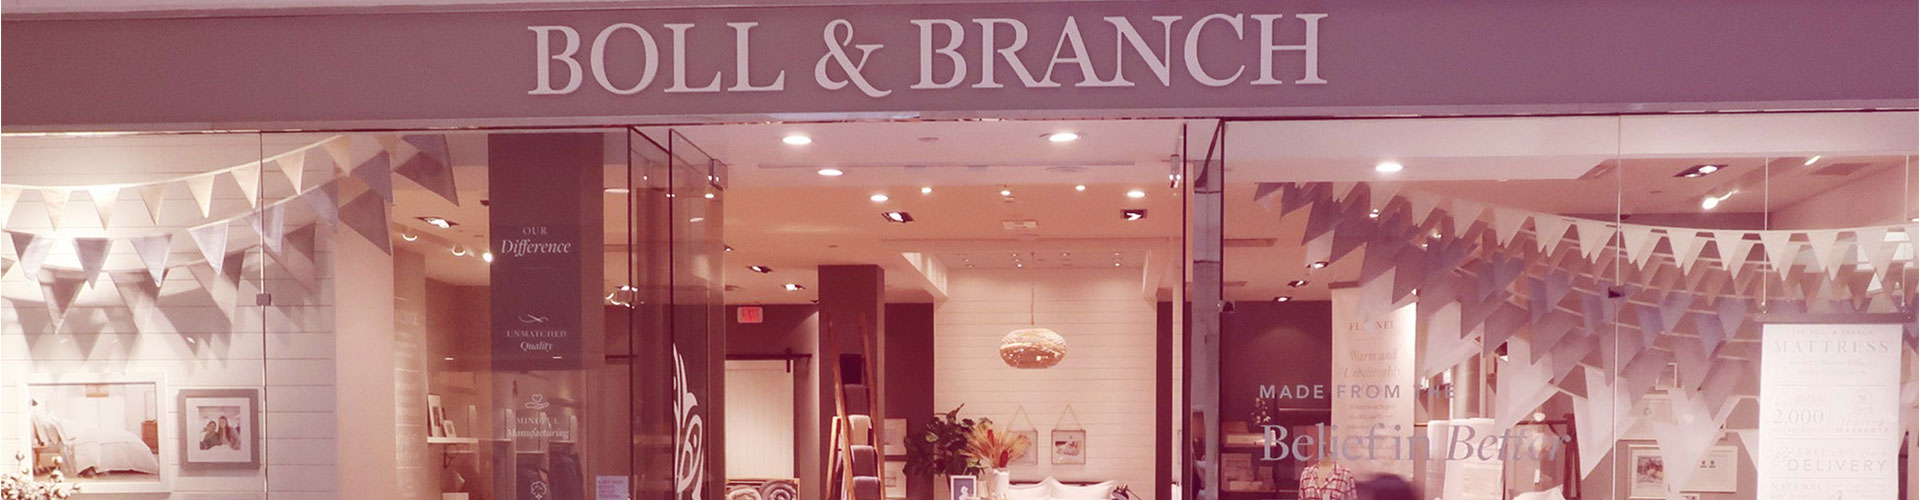 Blog banner featuring Boll & Branch storefront